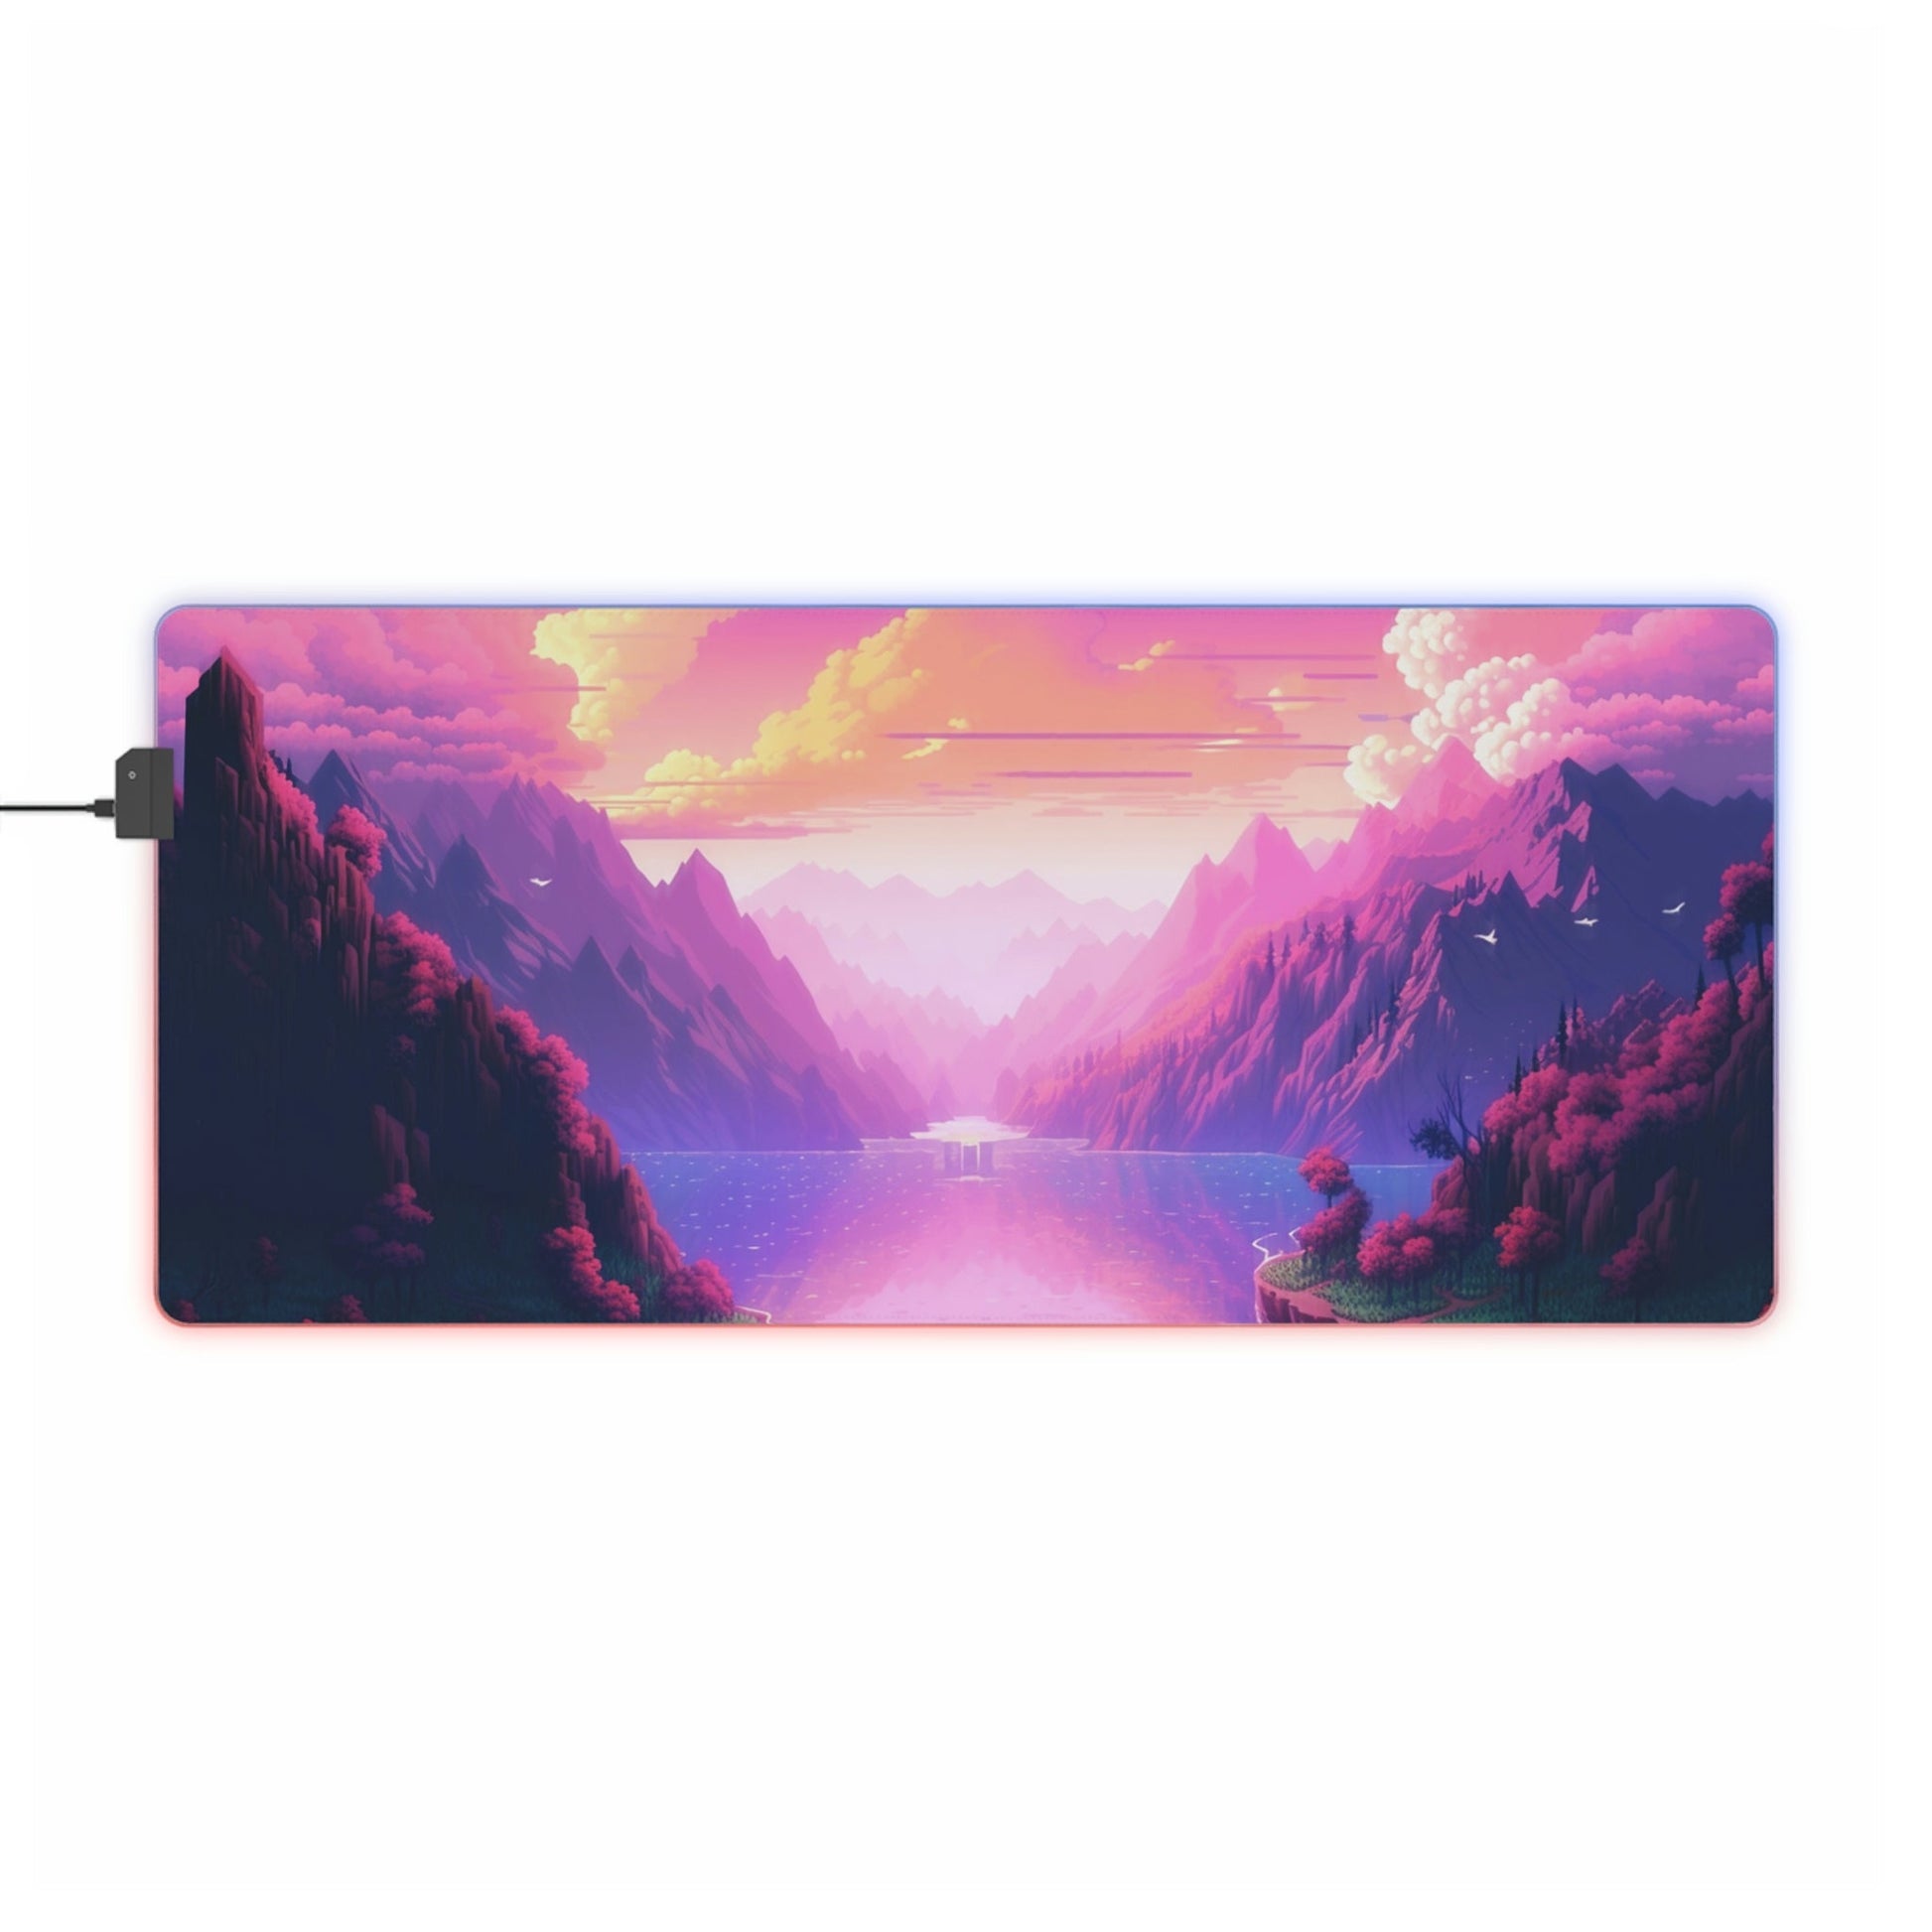 2 Neduz Loch PinkWorld LED Gaming Mouse Pad with 14